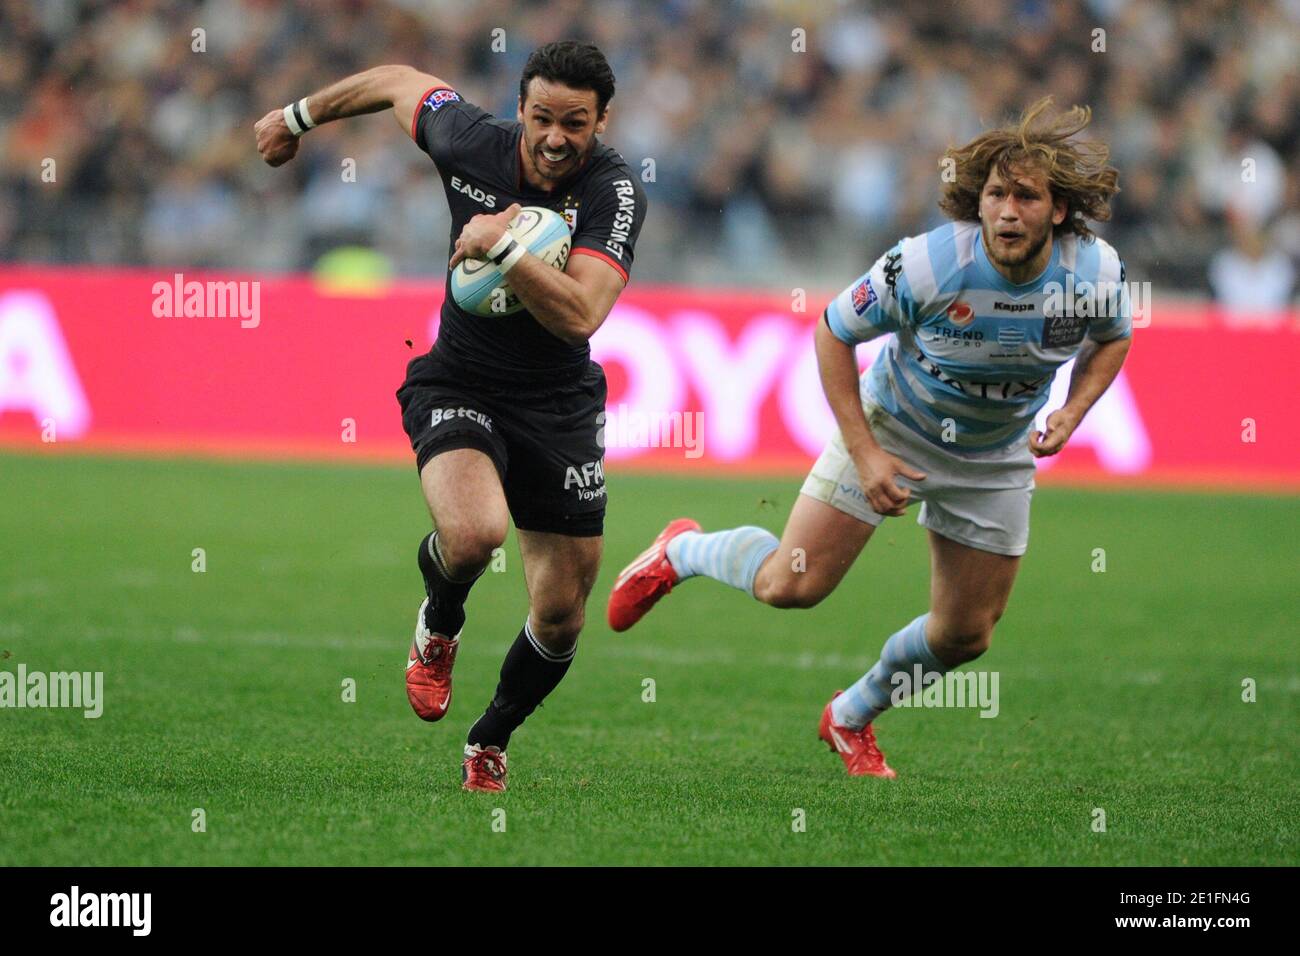 Racing-Metro's Francois Steyn battles Toulouse's Clement Poitrenaud during  the French Top 14 Rugby match, Racing-Metro vs Toulouse, at Stade de France  in St-Denis near Paris, France on March 26, 2011. Racing-Metro won